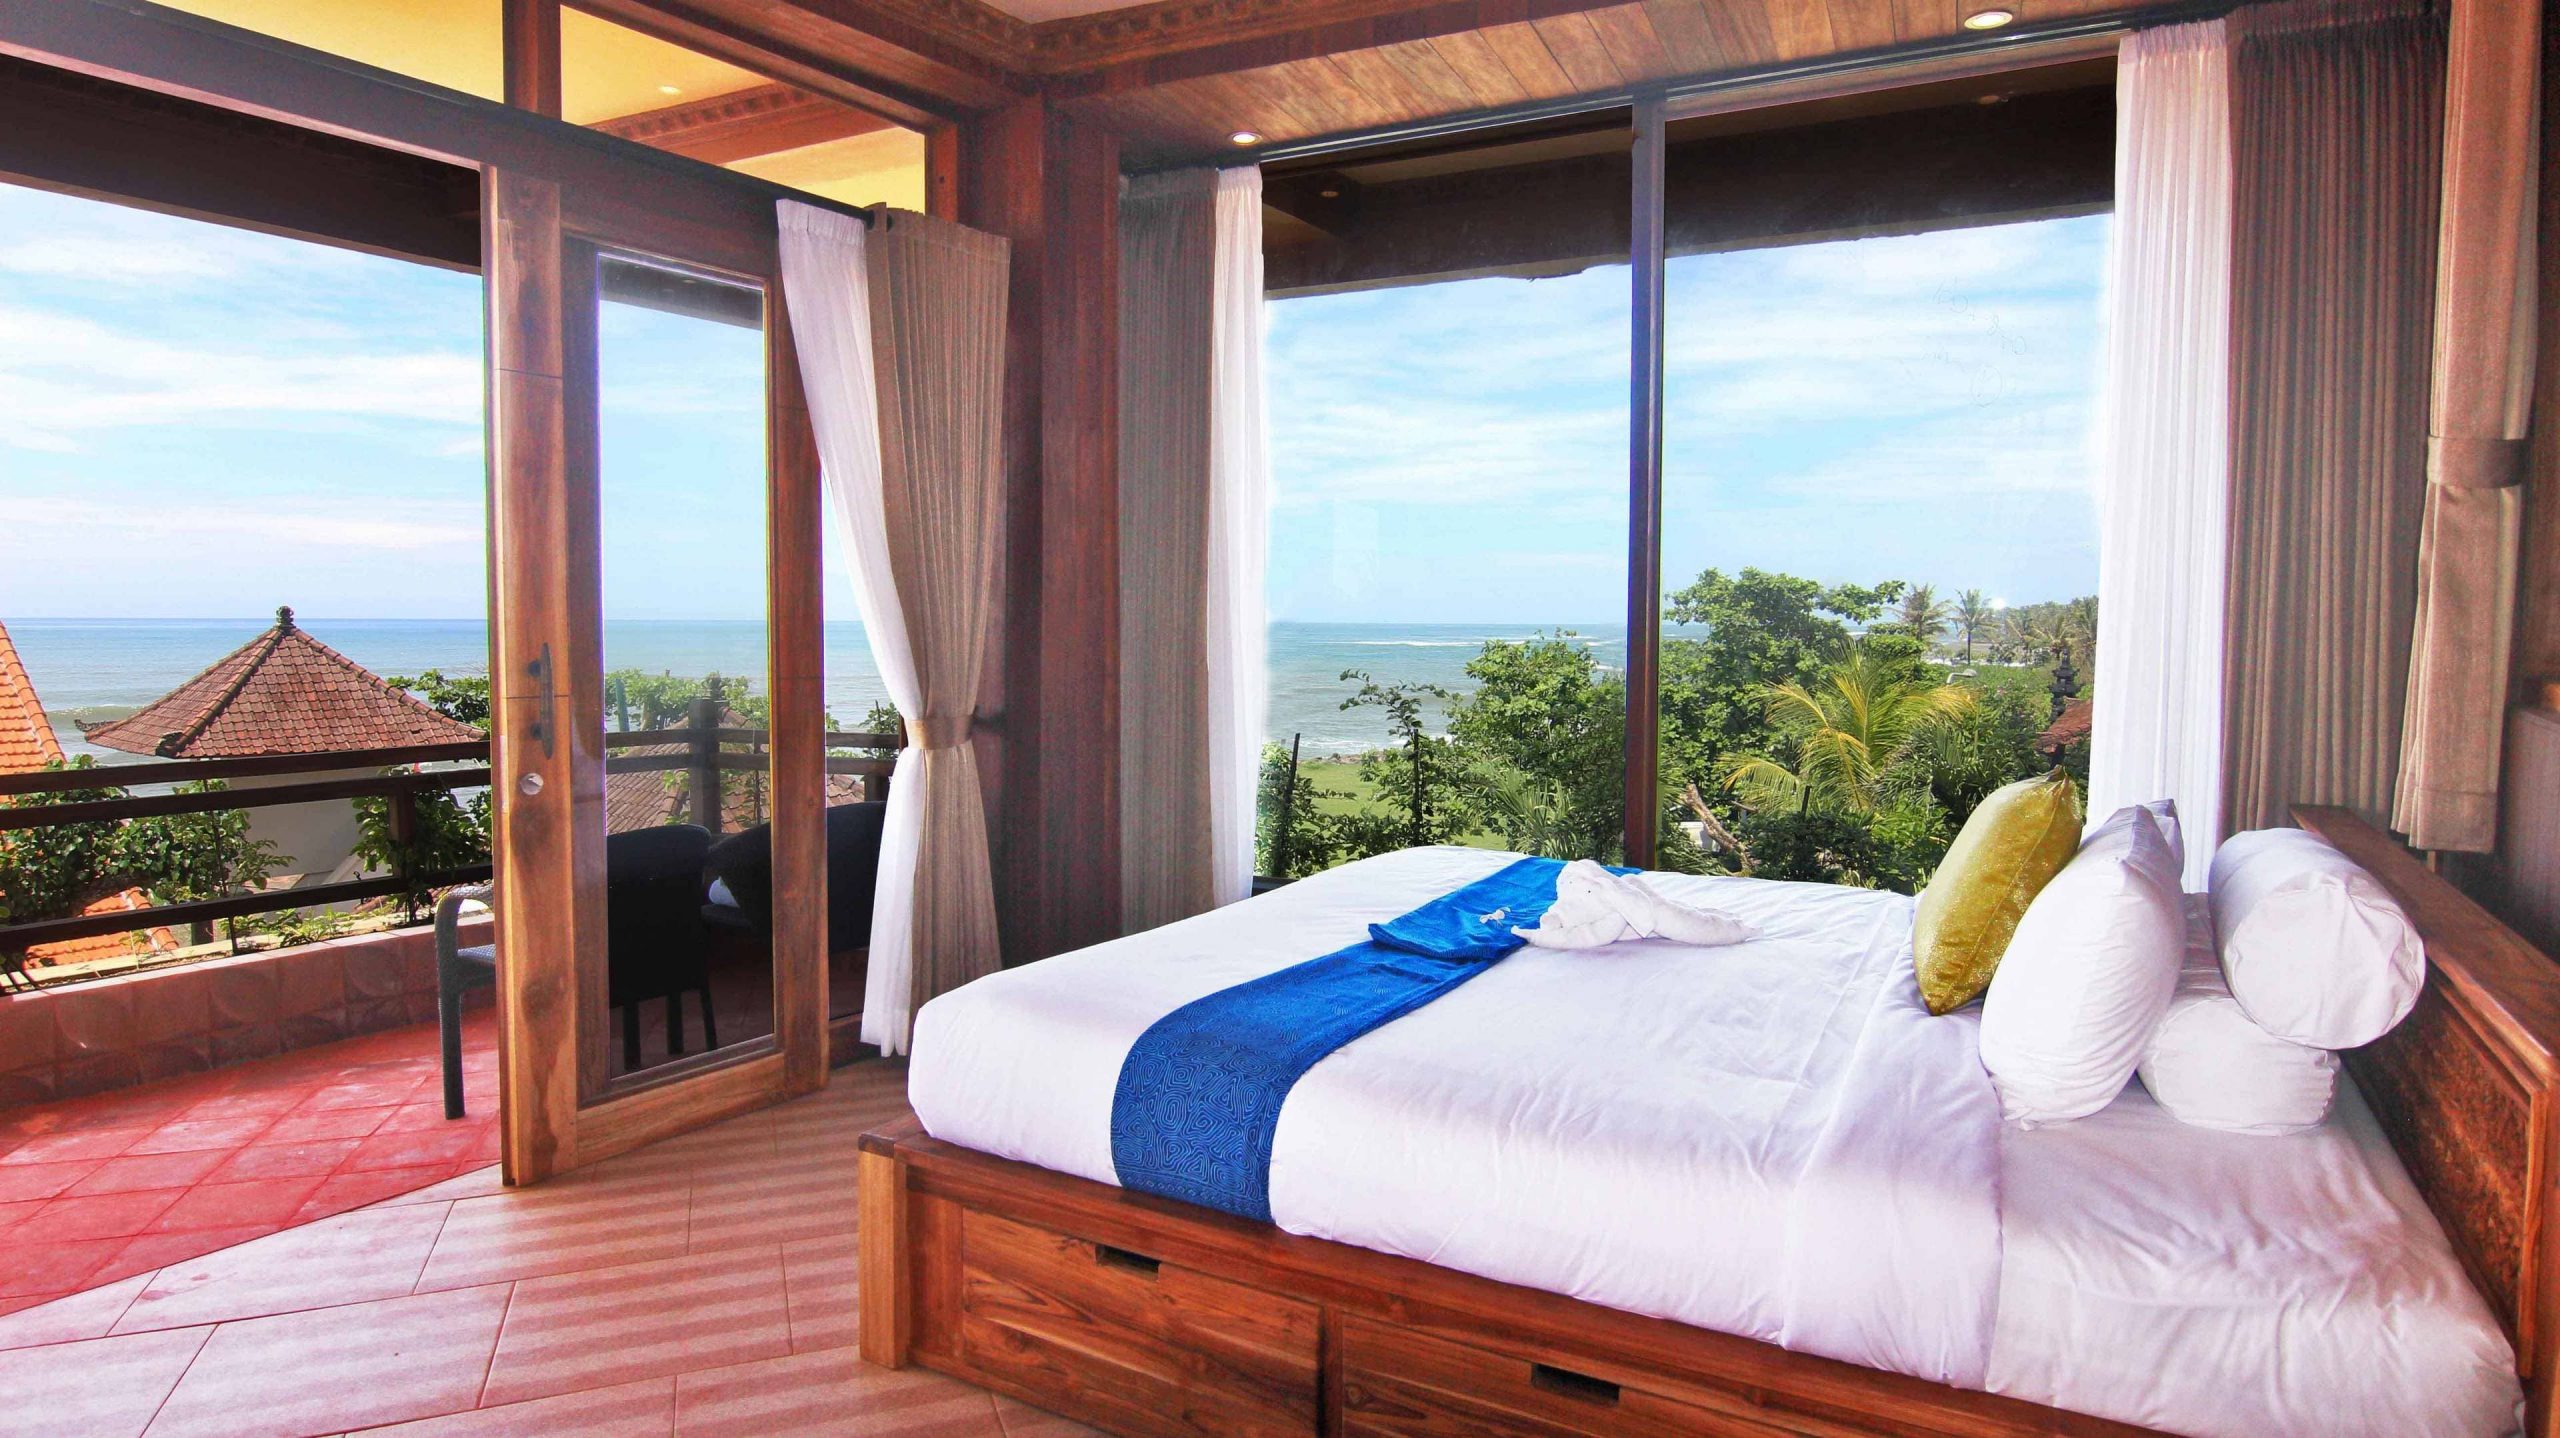 One of the luxurious guest suites offered at the Udara Bali Yoga Retreat.